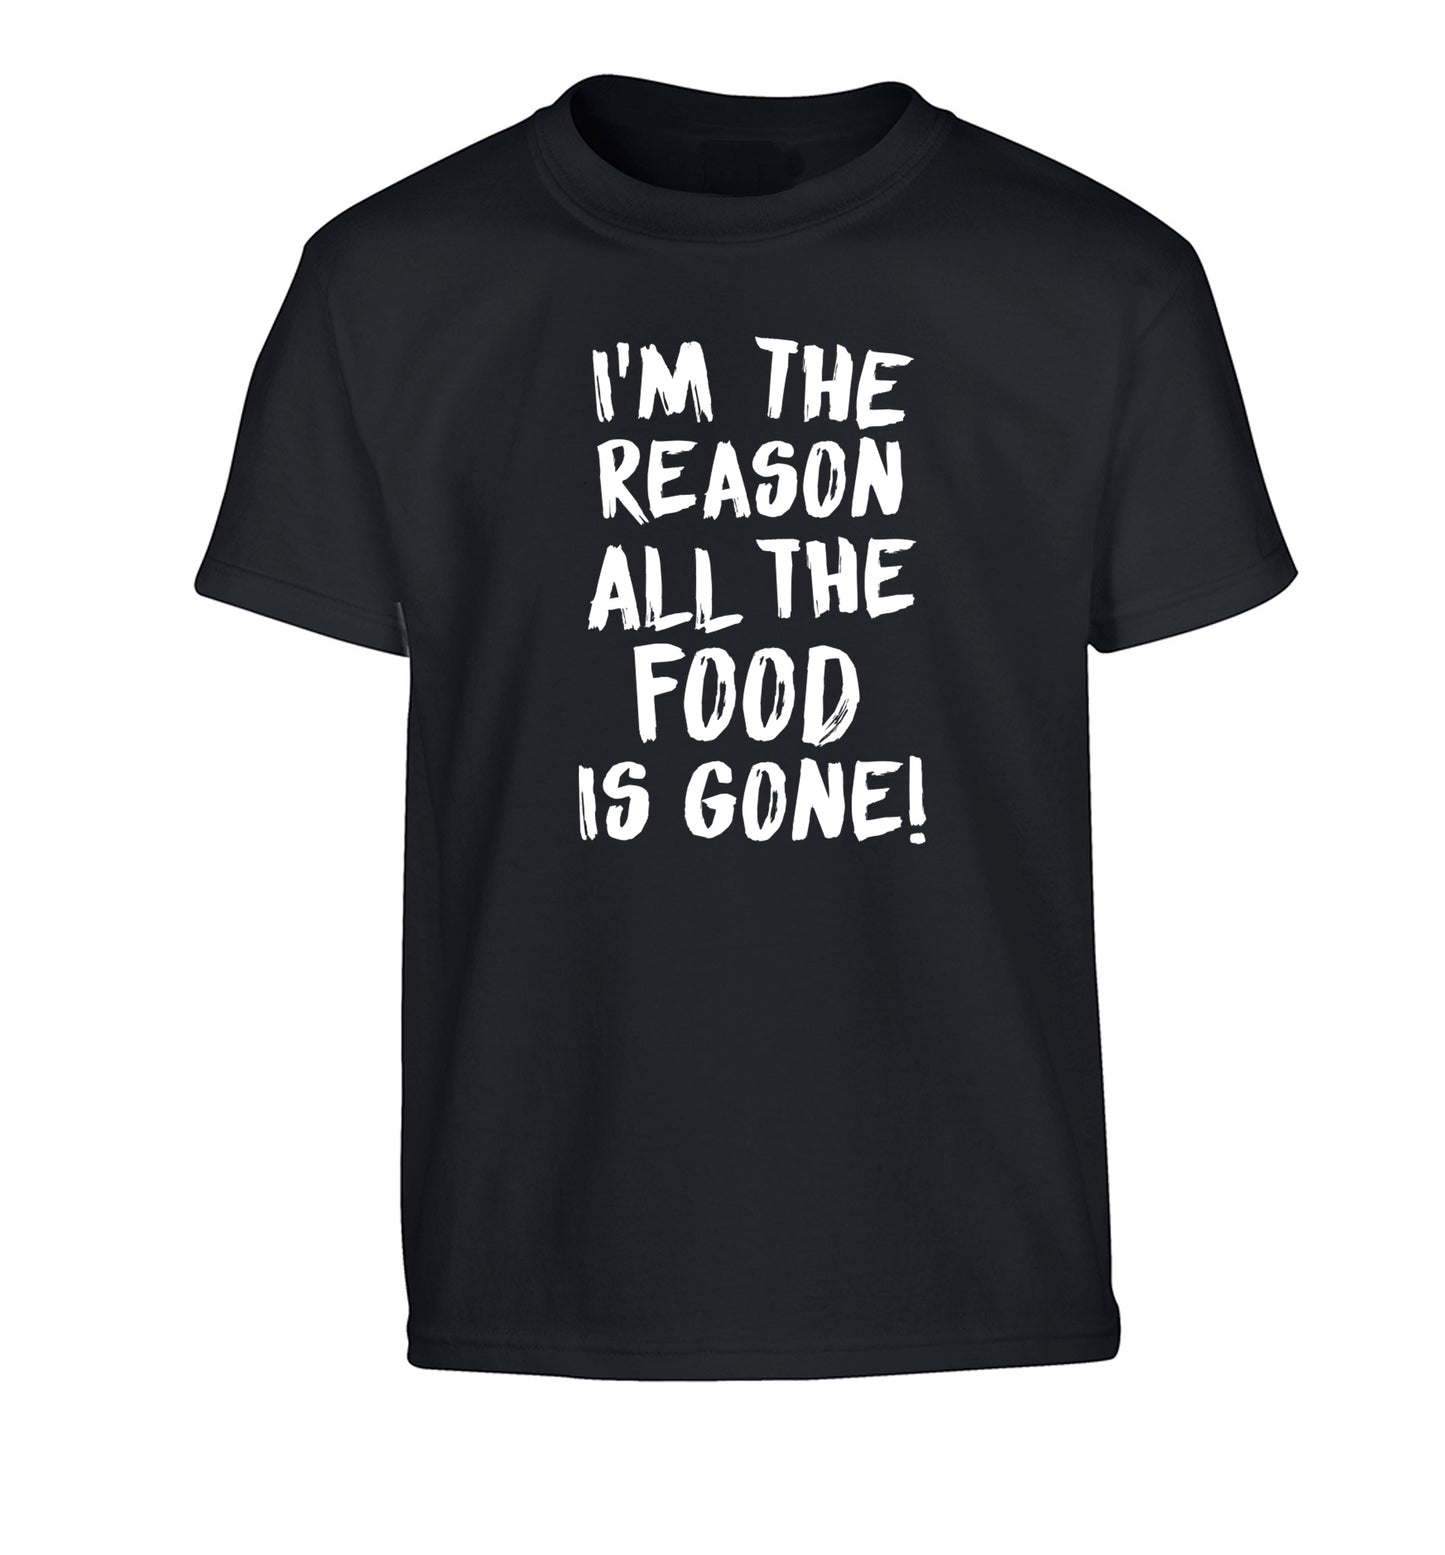 I'm the reason why all the food is gone Children's black Tshirt 12-13 Years